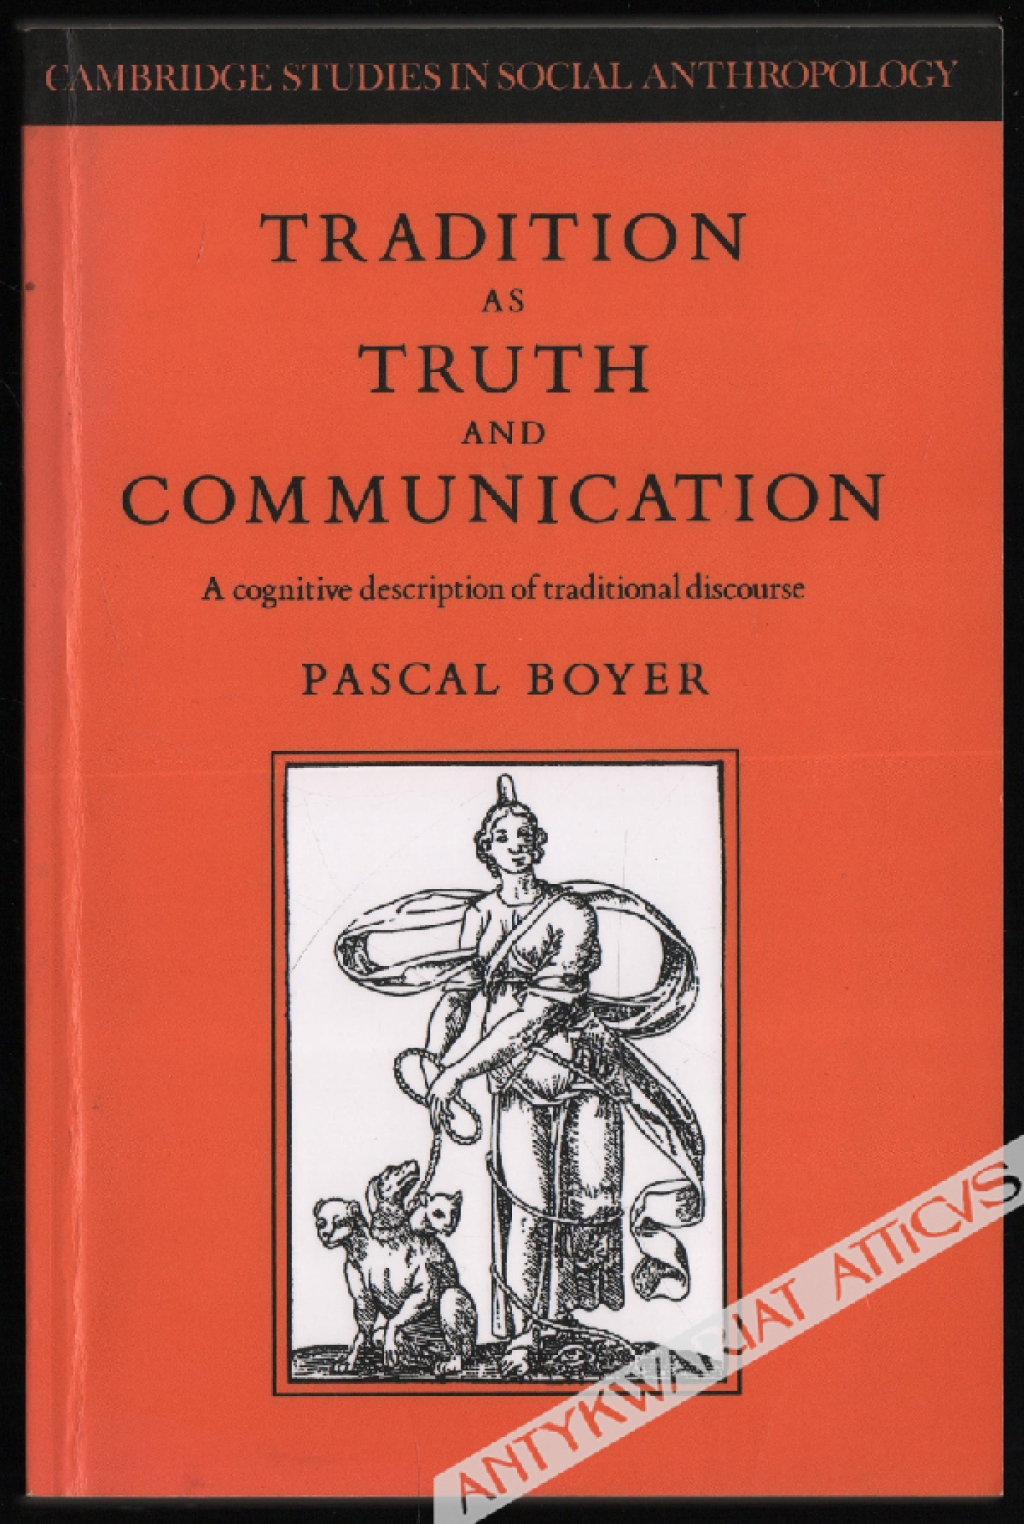 Tradition as Truth and Communication. A cognitive description of traditional discourse